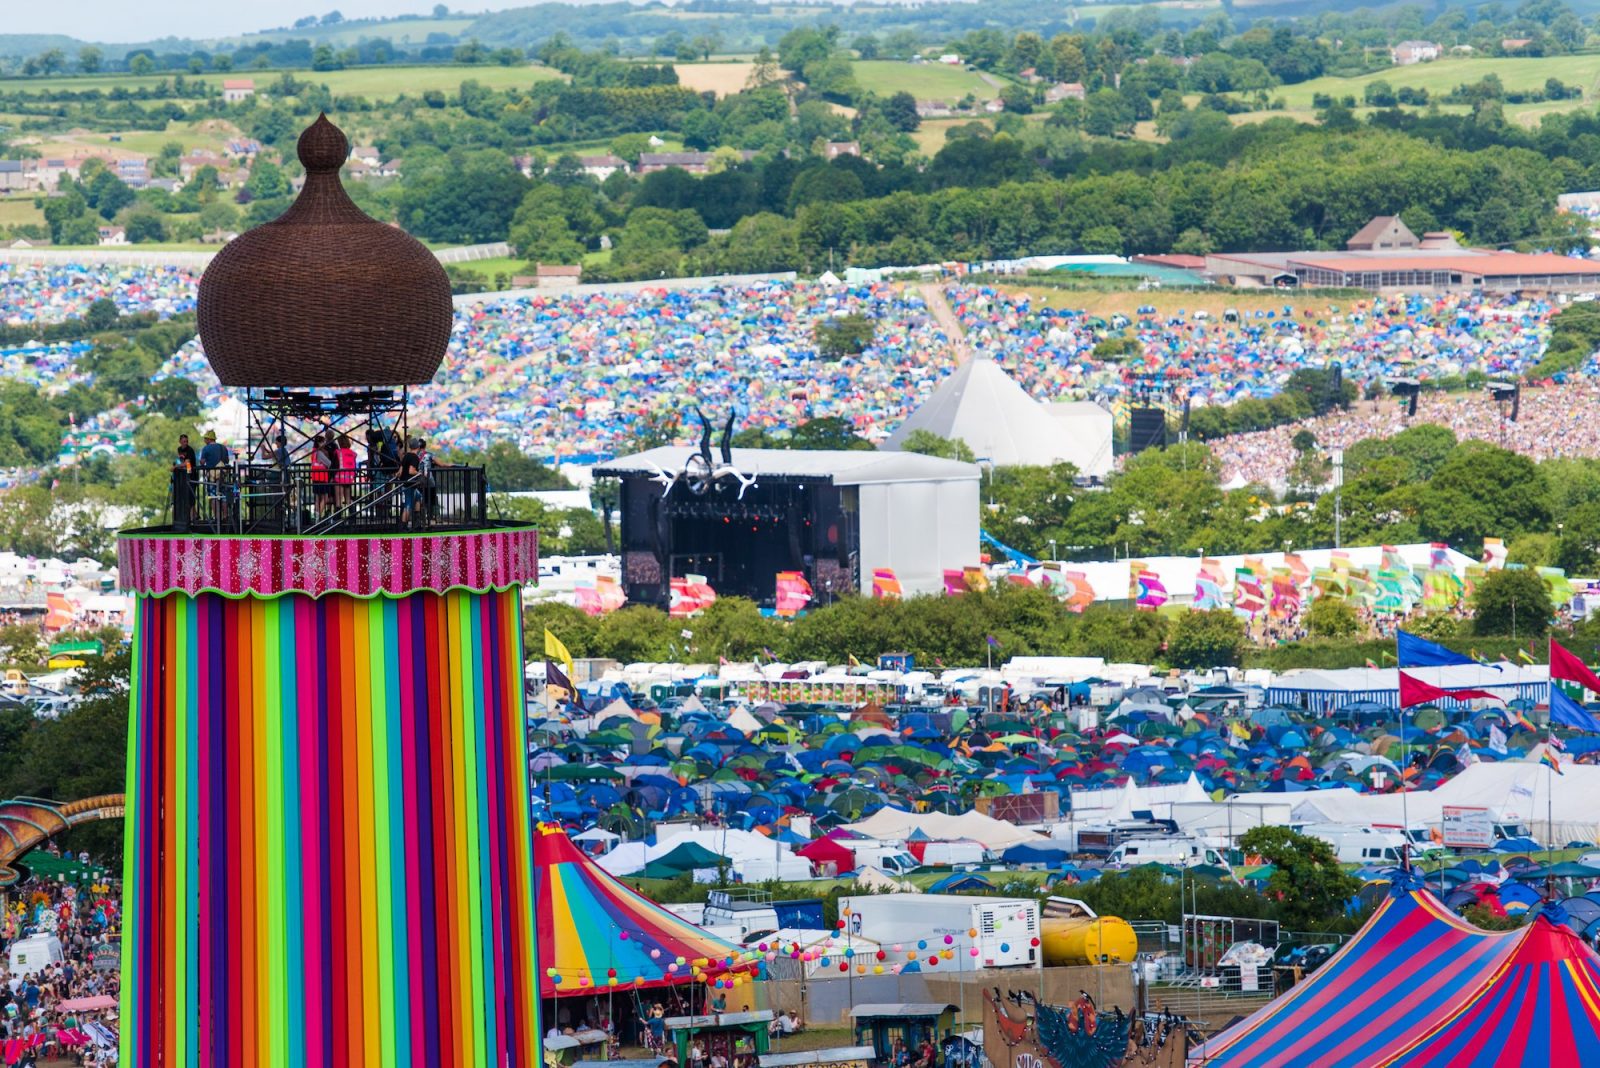 An overview of Glastonbury Festival.